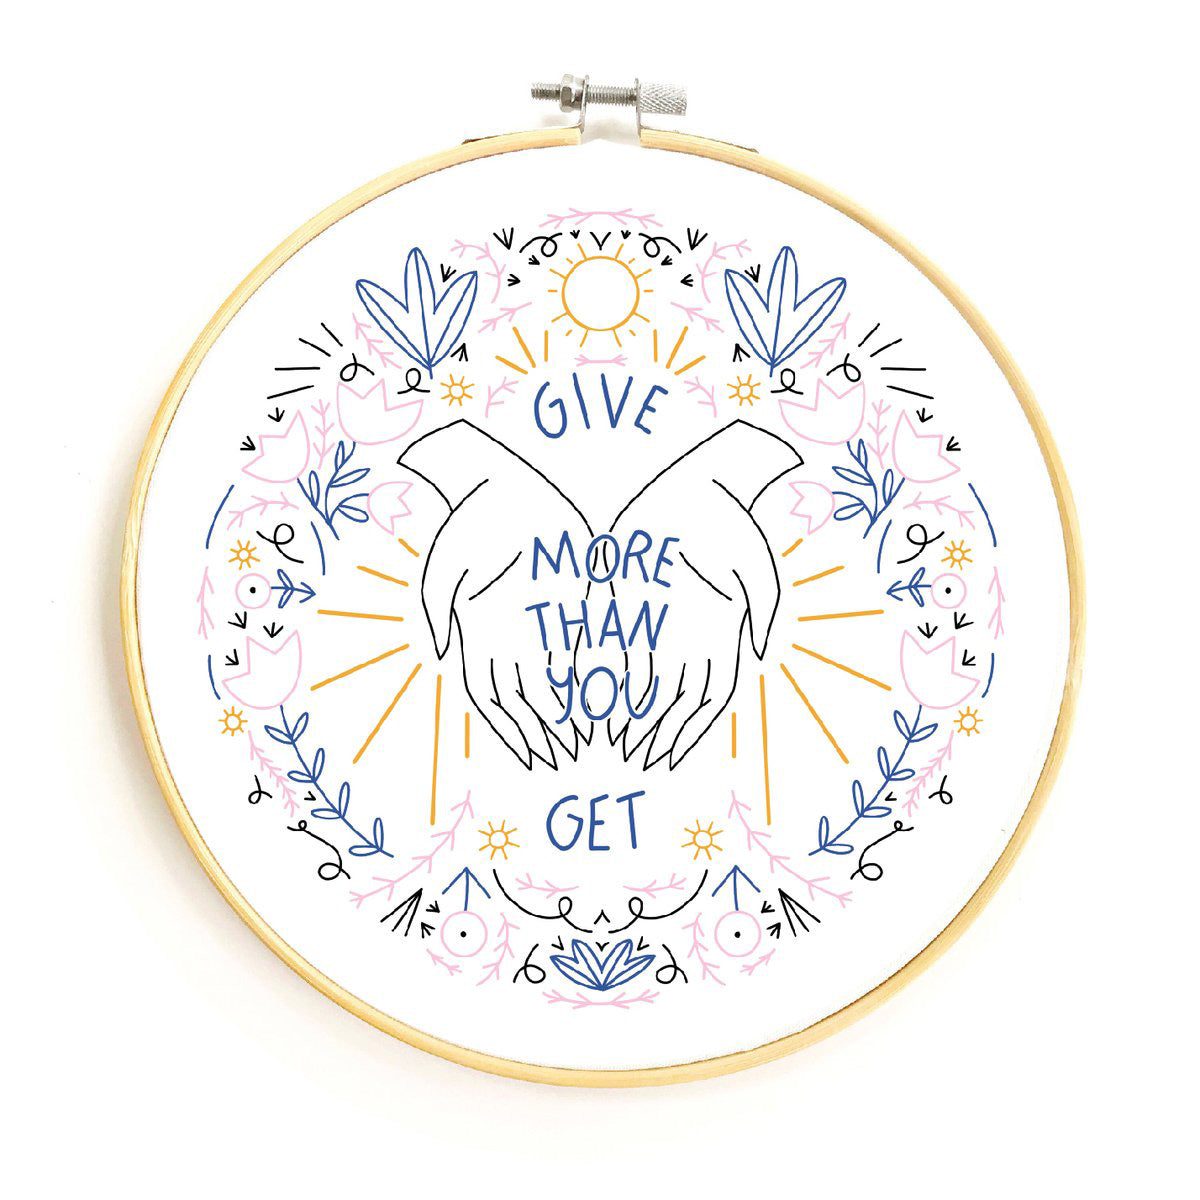 Give More Than You Get Hand Embroidery kit